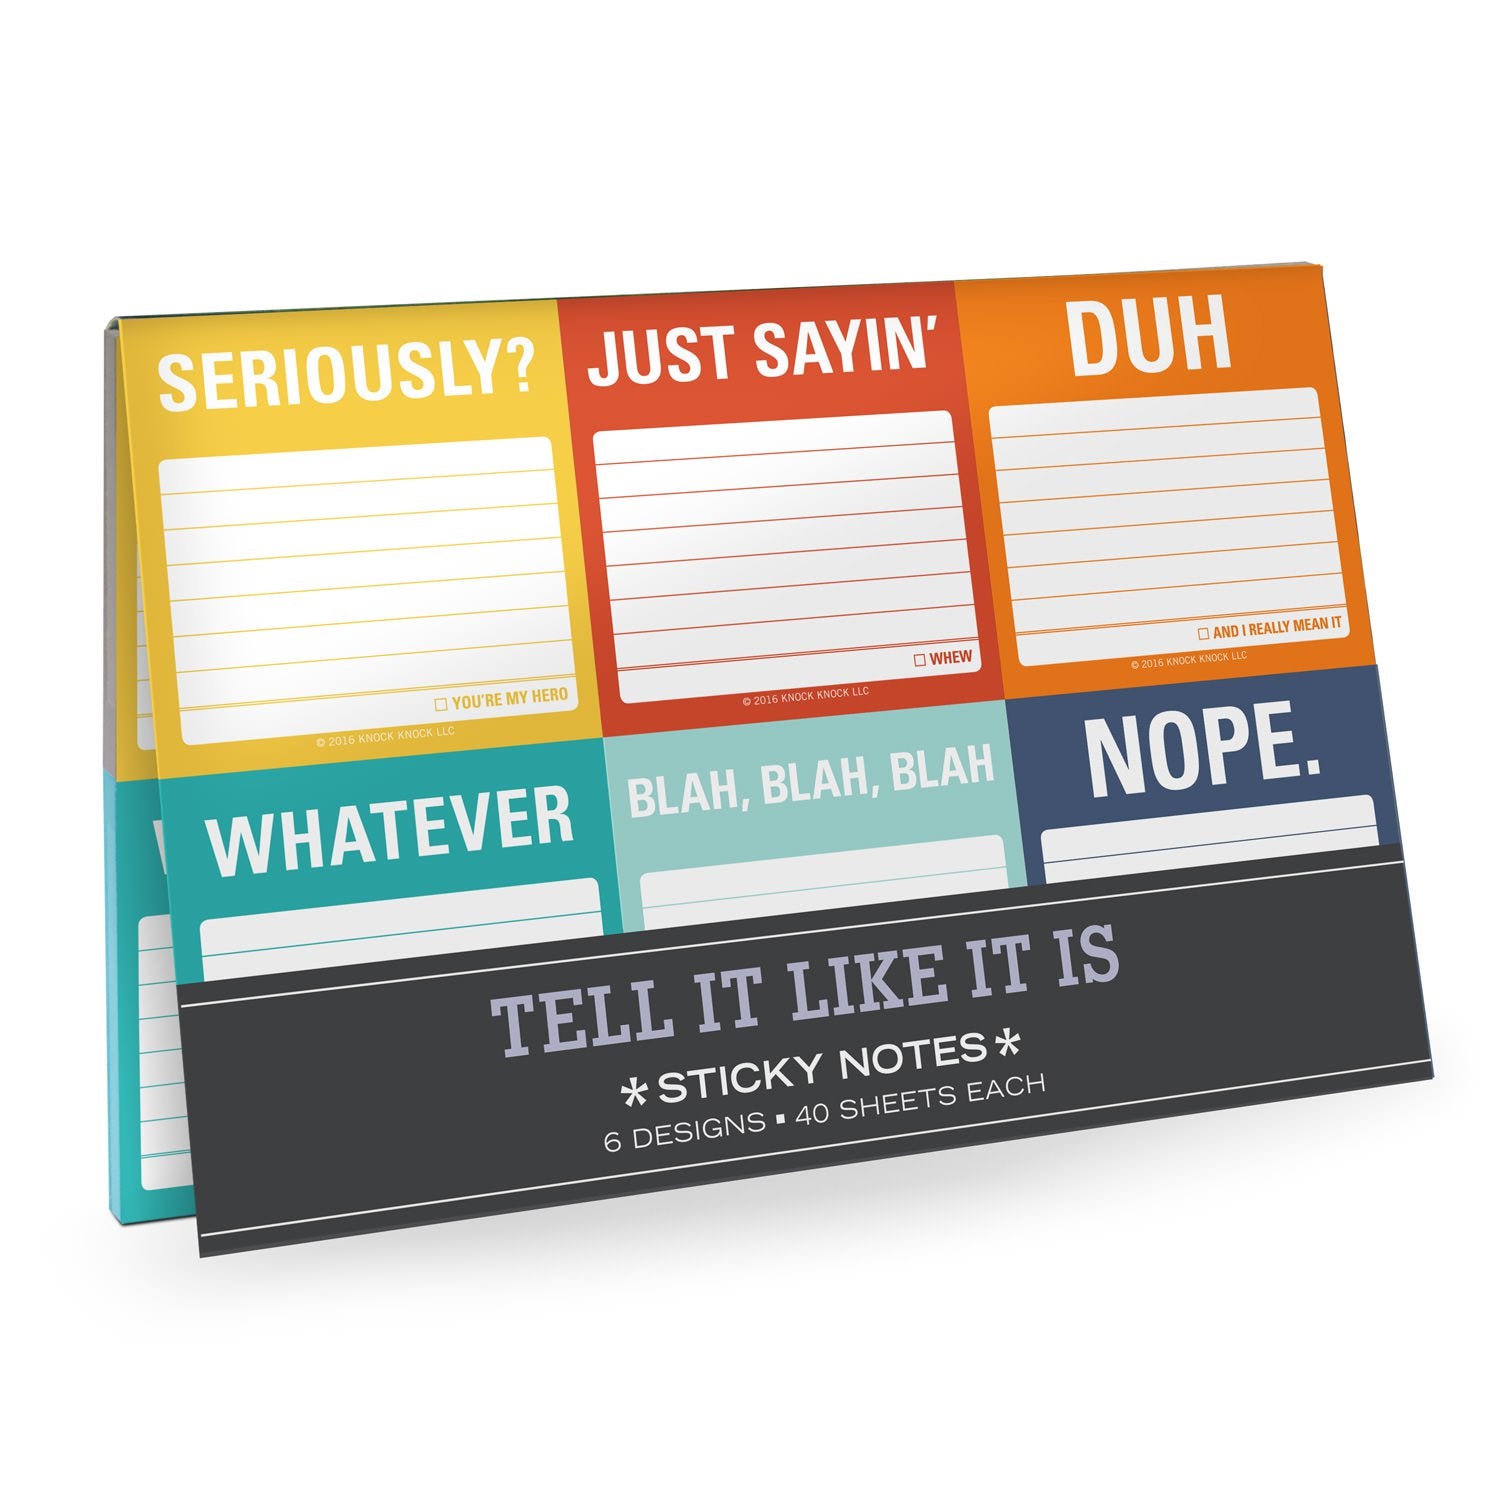 Tell It Like It Is Sticky Notes Set / Packet